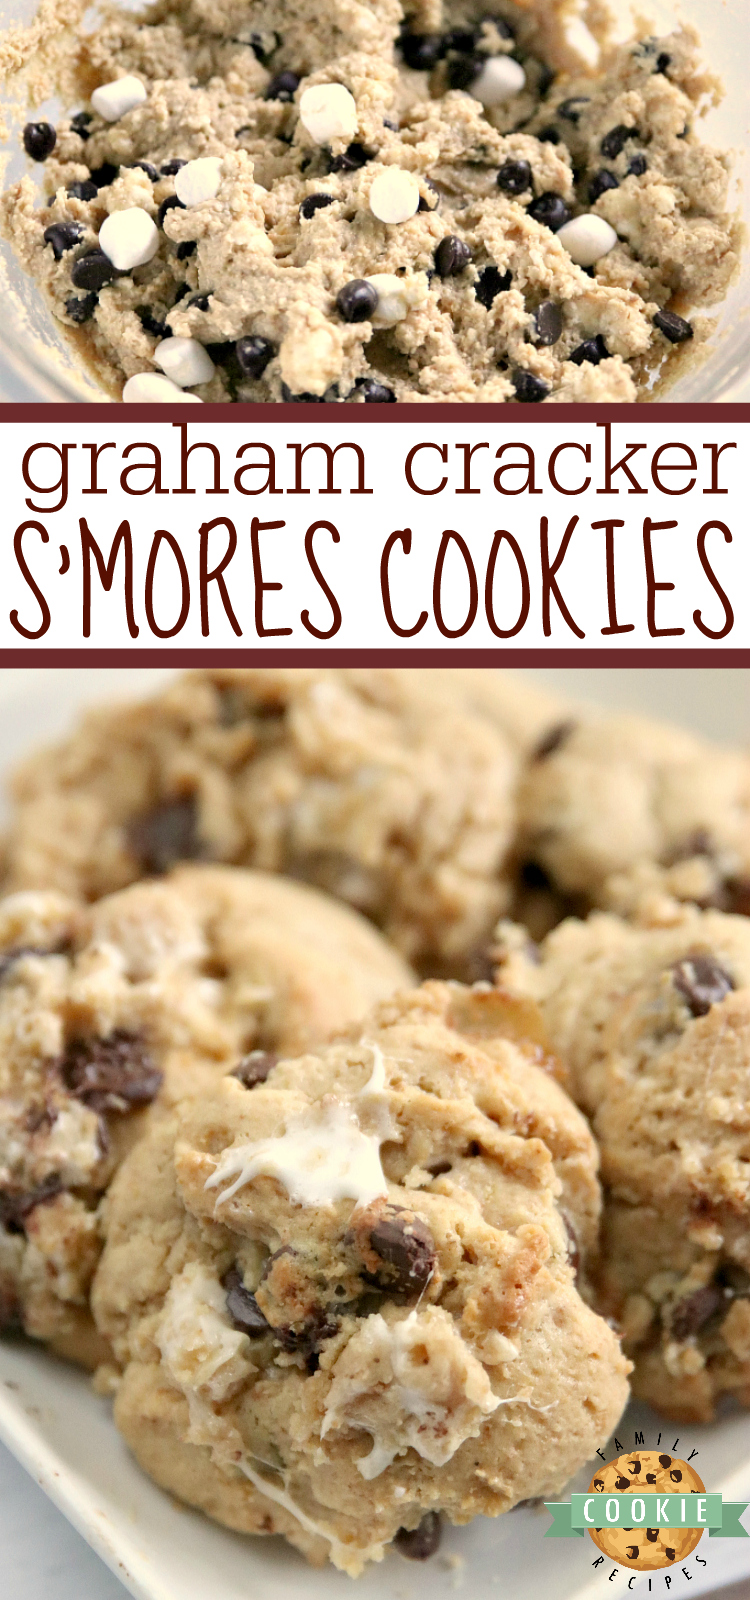 Graham Cracker S'mores Cookies are made with graham cracker crumbs, marshmallows and chocolate chips. All of the elements of a s'more in a deliciously soft and chewy cookie recipe!